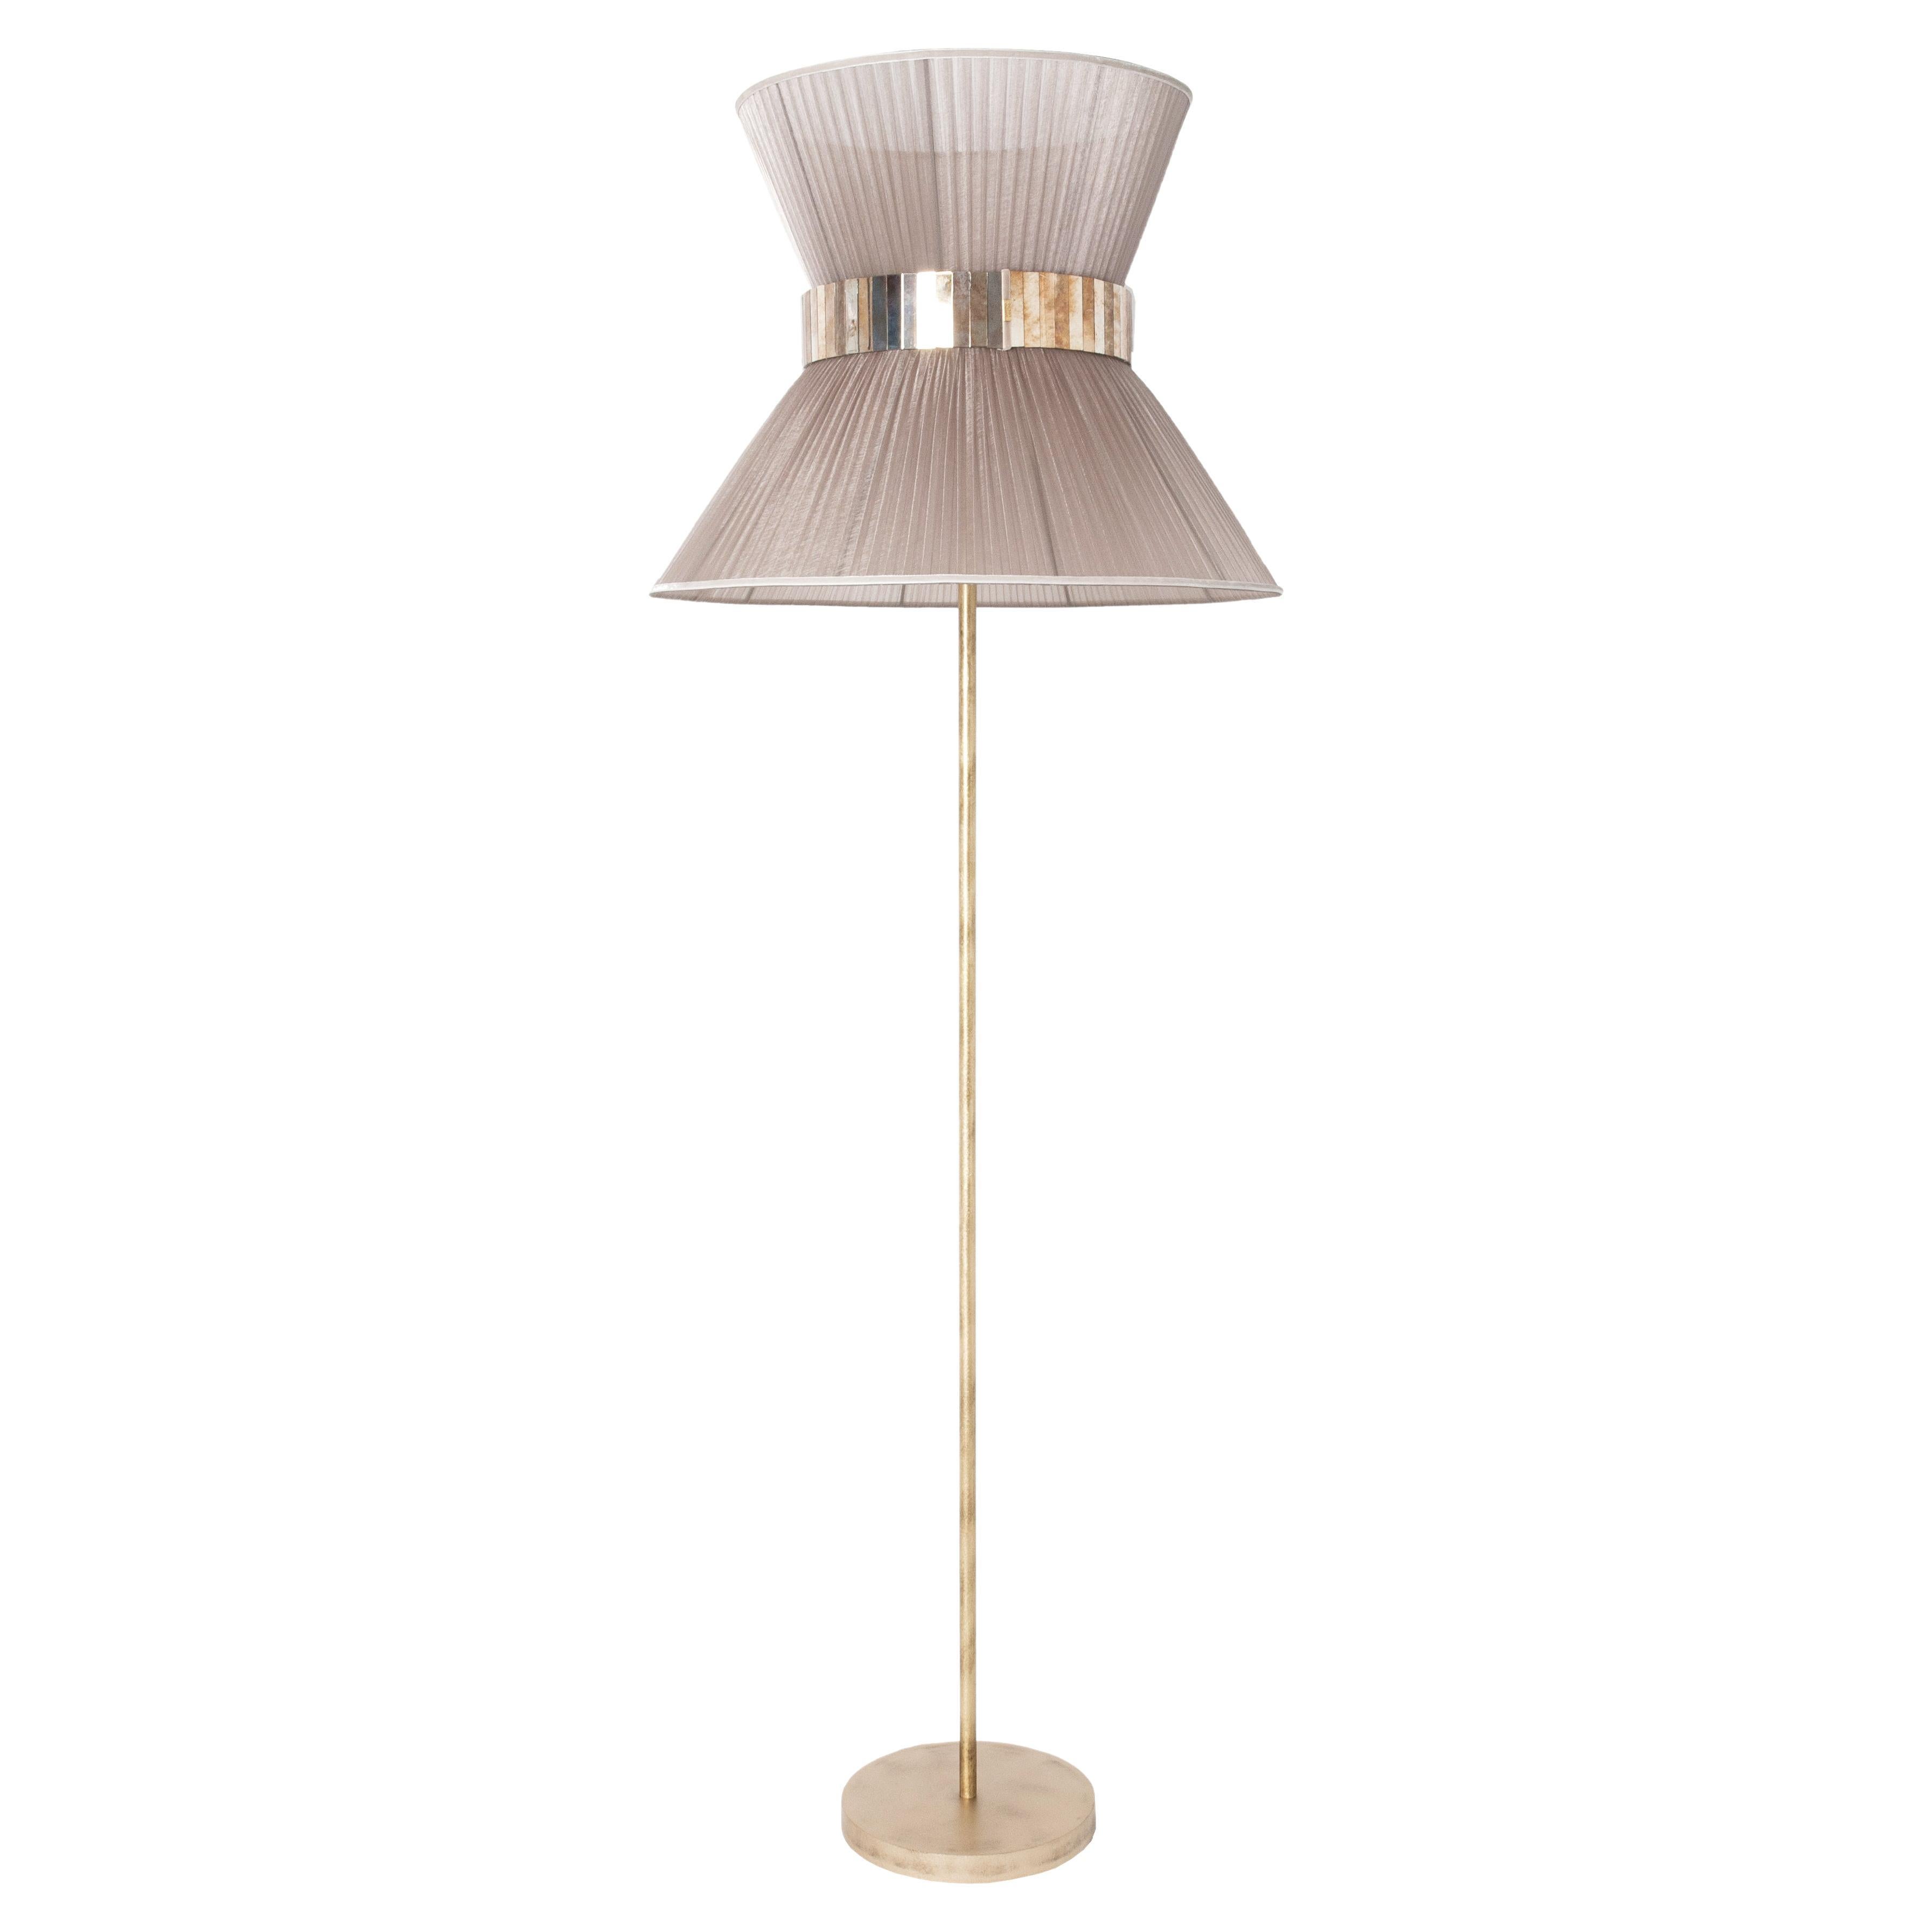 Tiffany Contemporary Floor Lamp 60 Champagne, Antiqued Brass, Silvered Glass  